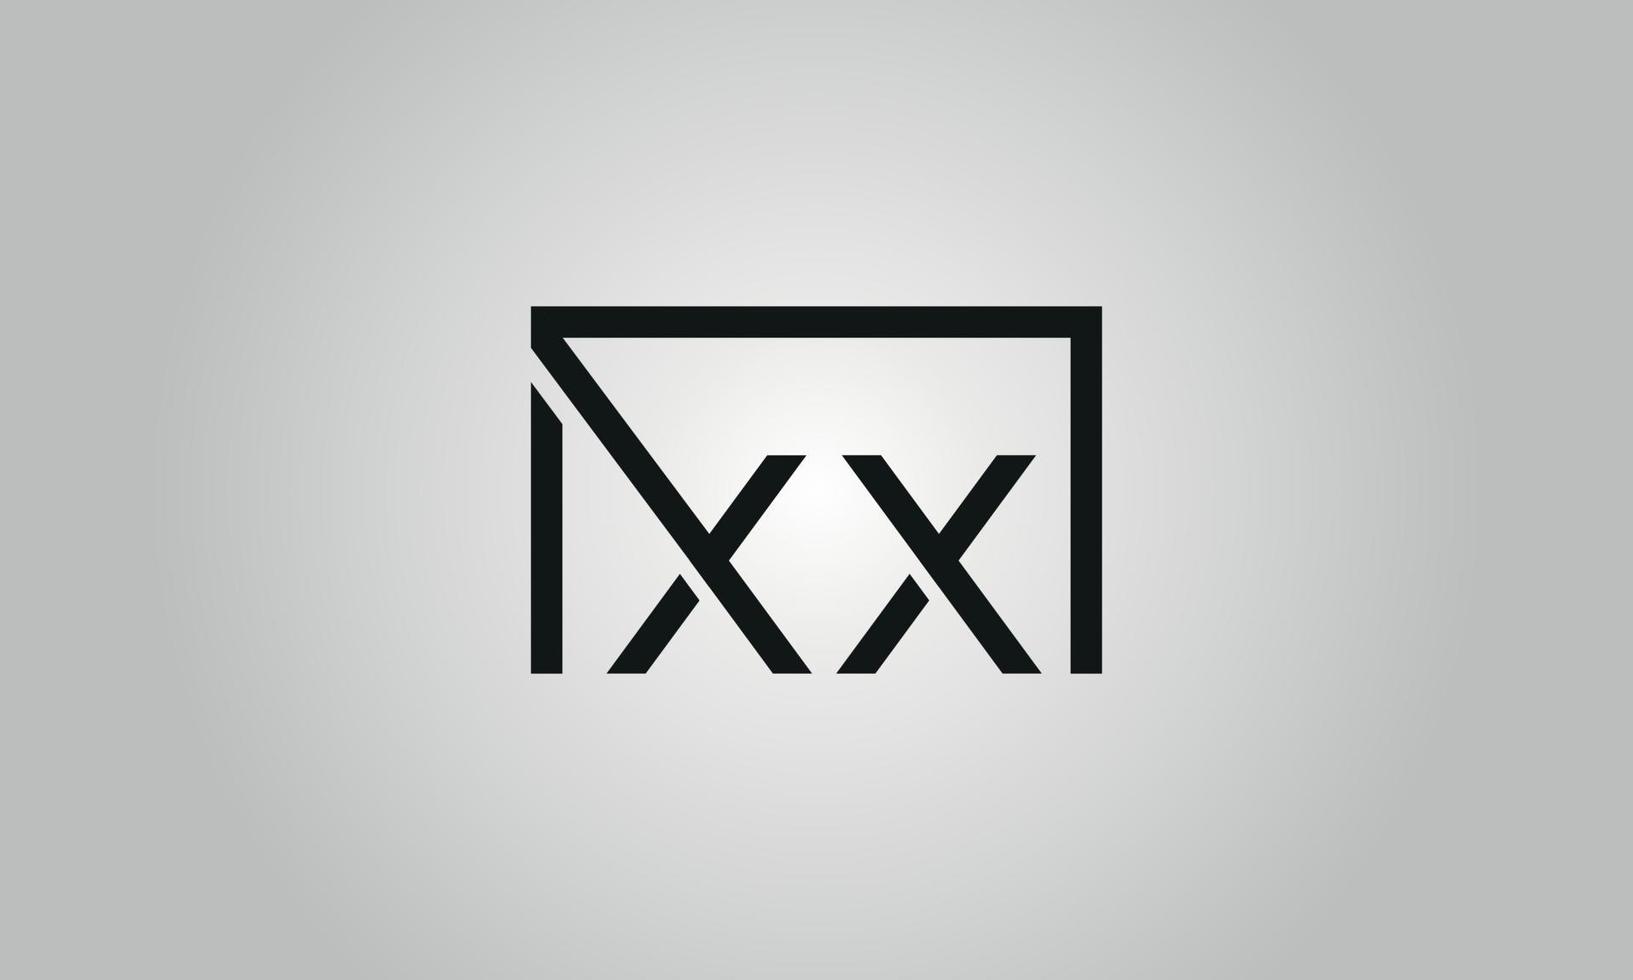 Letter XX logo design. XX logo with square shape in black colors vector free vector template.